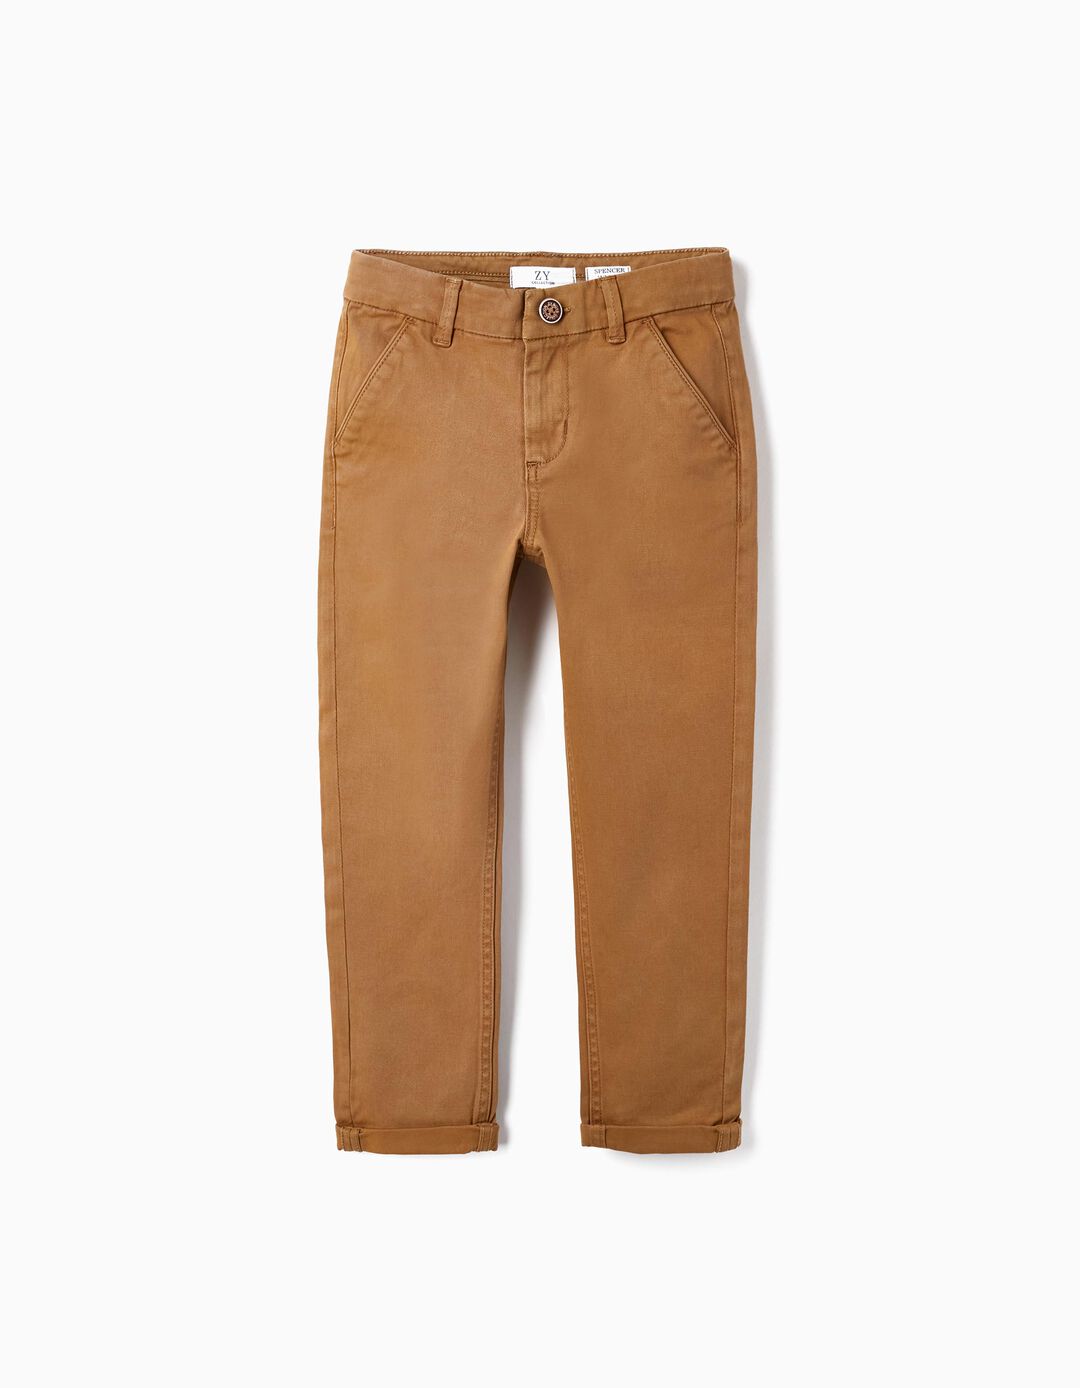 Cotton Chino Trousers for Boys, Camel